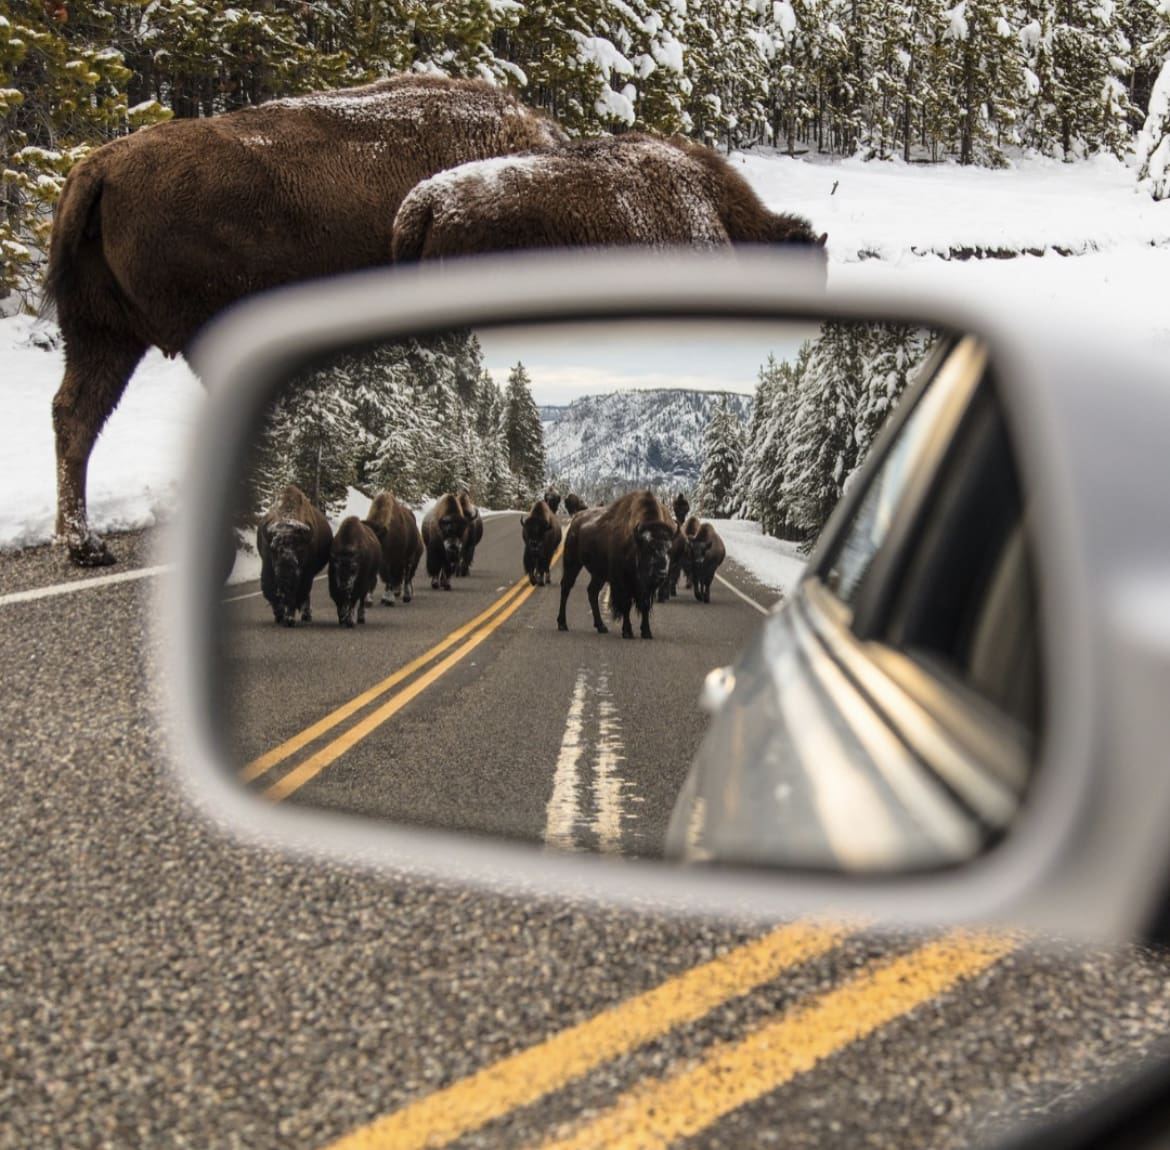 Bison in the mirror